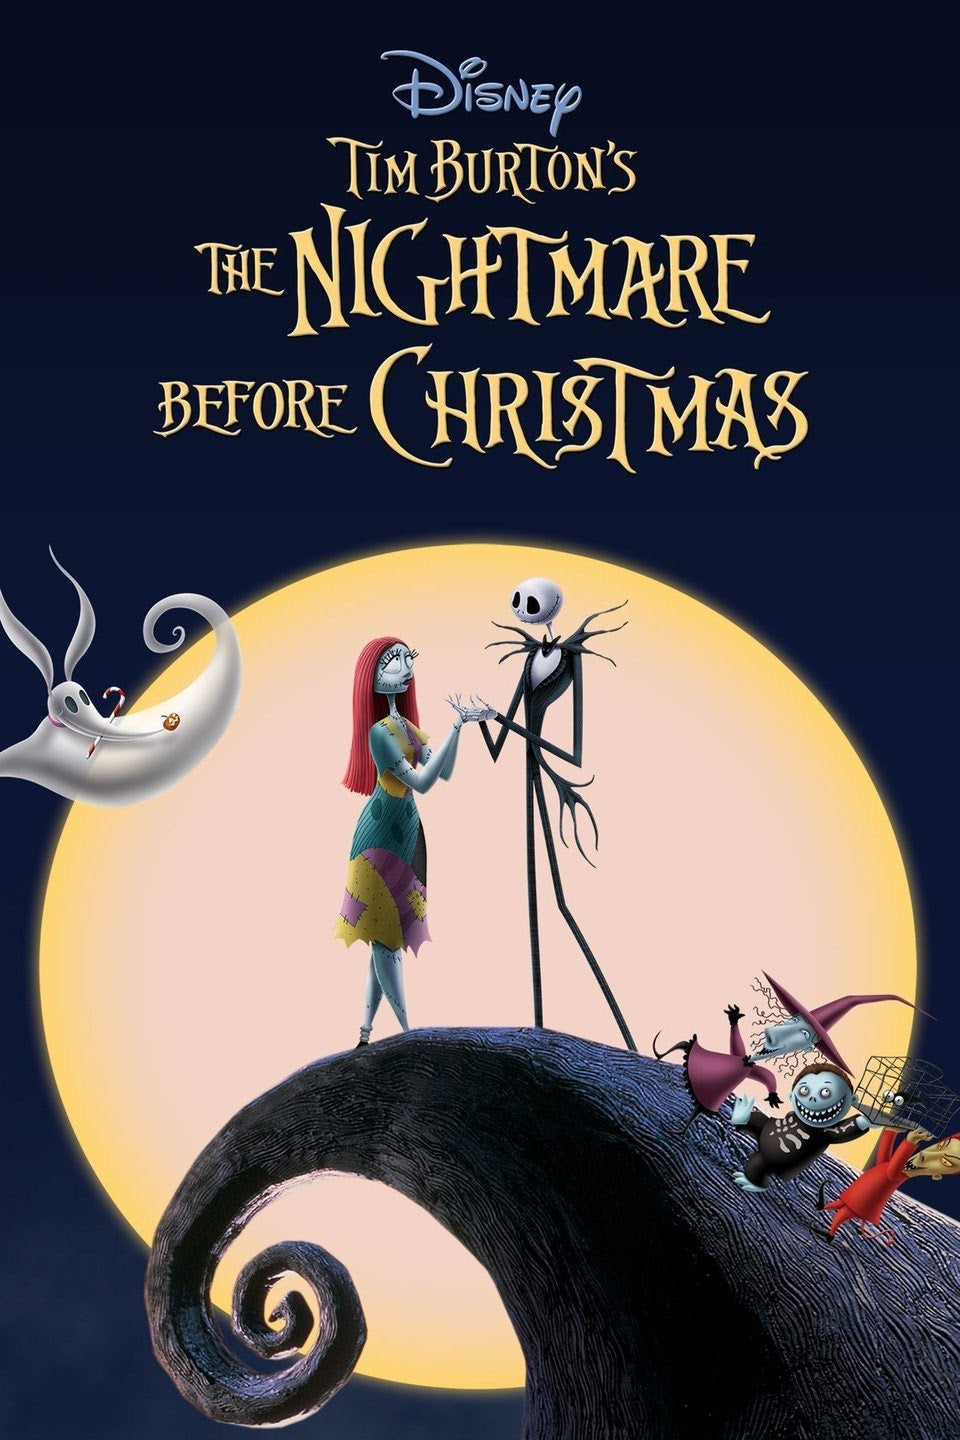 The Nightmare Before Christmas (1993) Vudu or Movies Anywhere HD redemption only